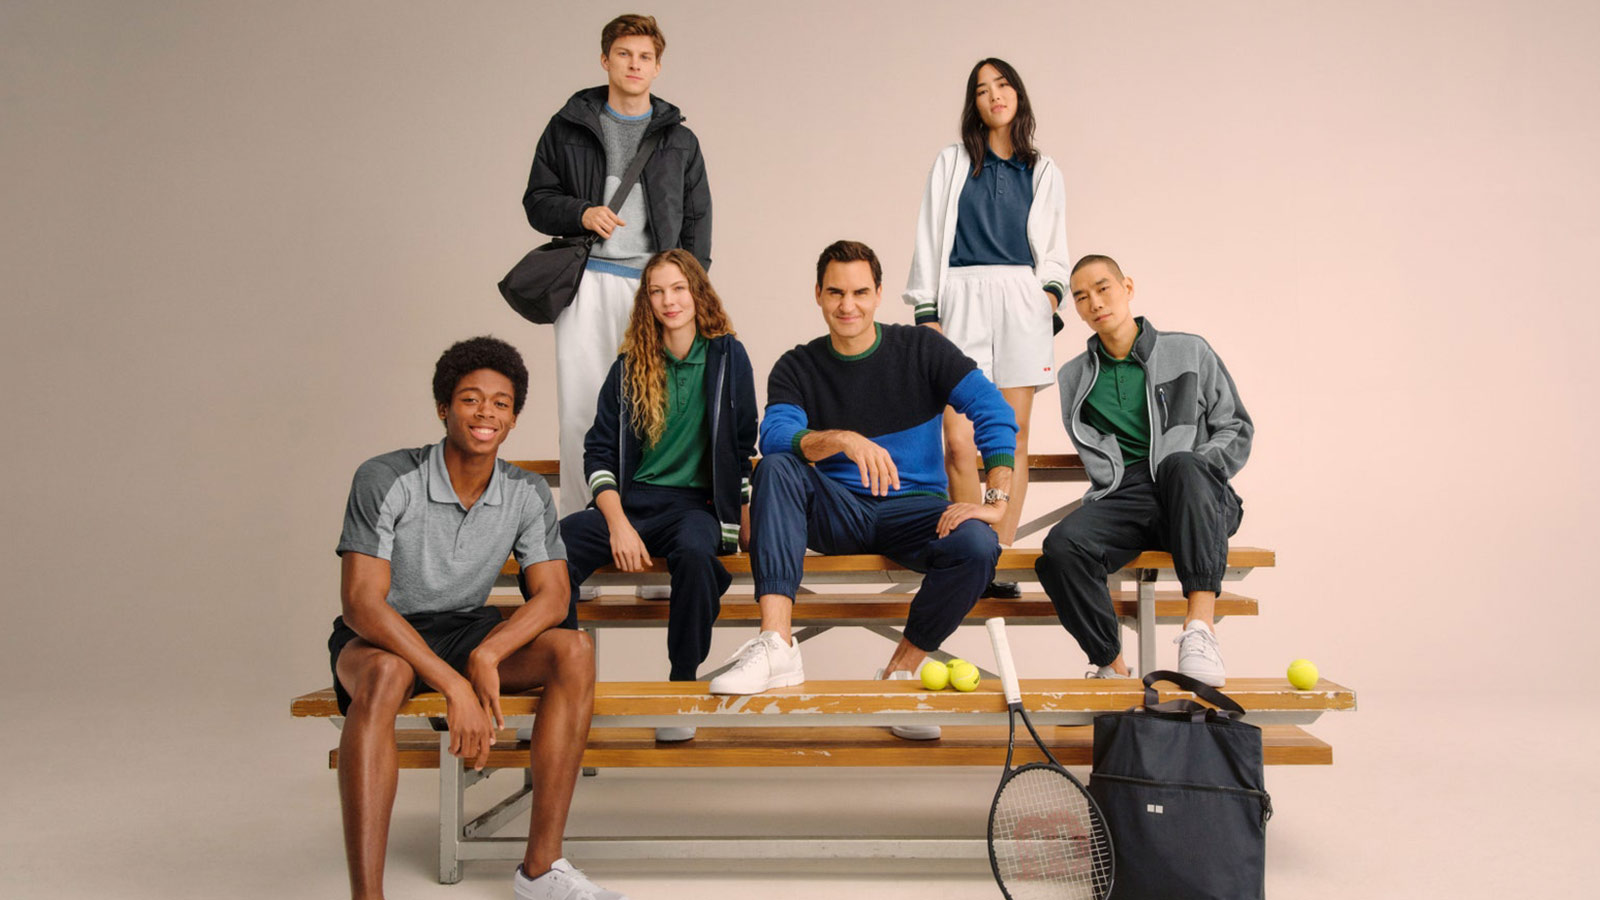 Roger Federer LifeWear Uniqlo collection